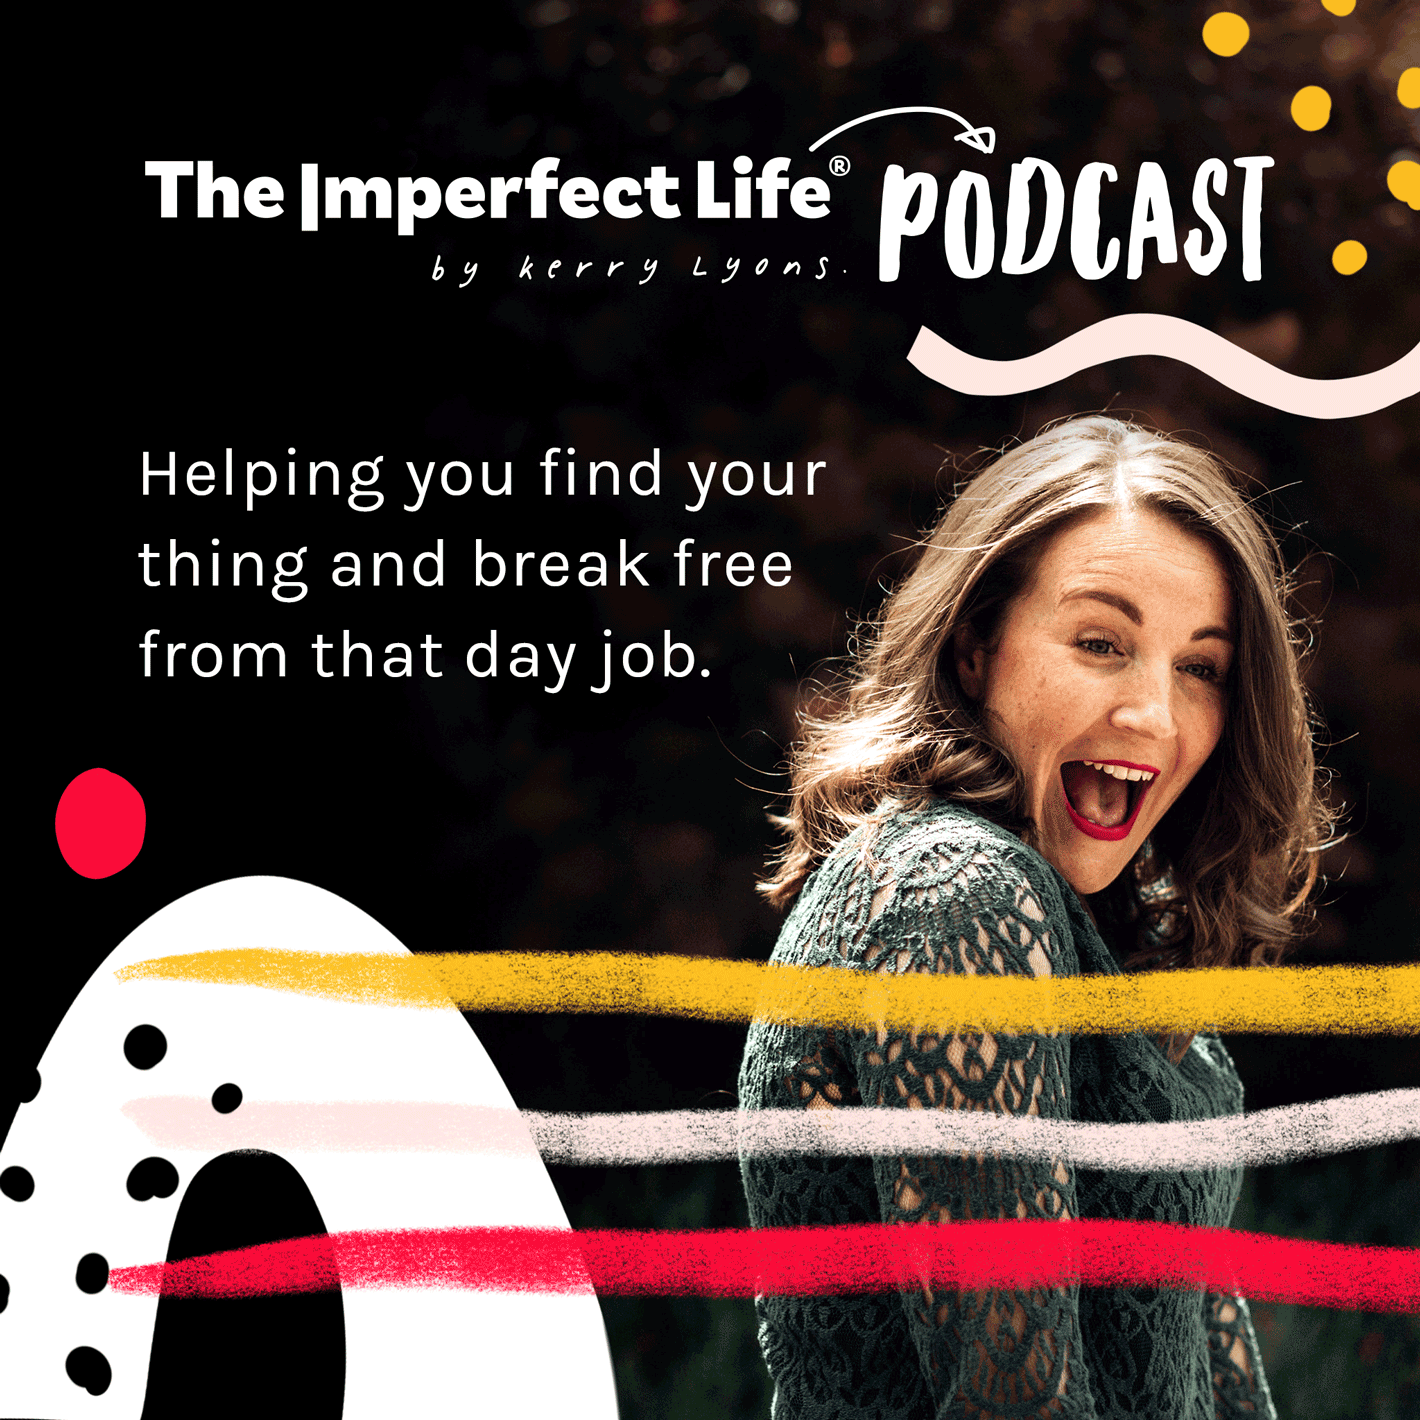 The Imperfect Life Podcast